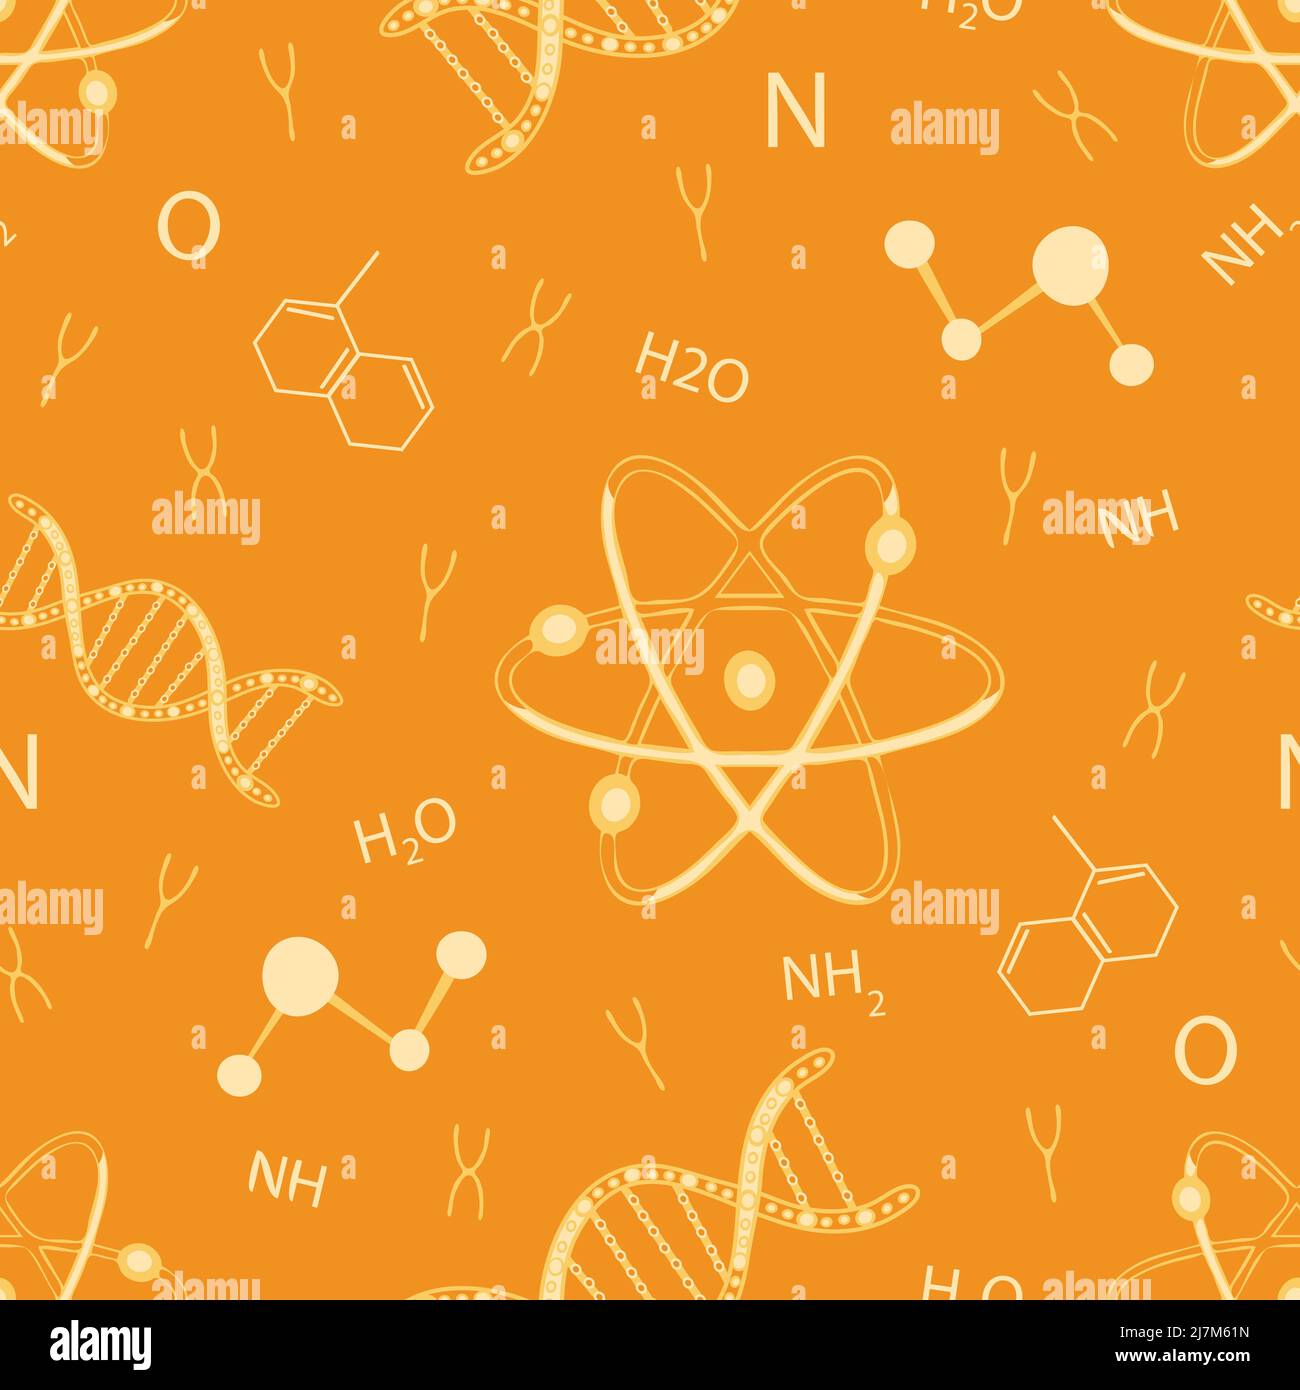 Seamless vector pattern with DNA and atom on yellow background. Chemistry student wallpaper design. Decorative science fashion textile. Stock Vector